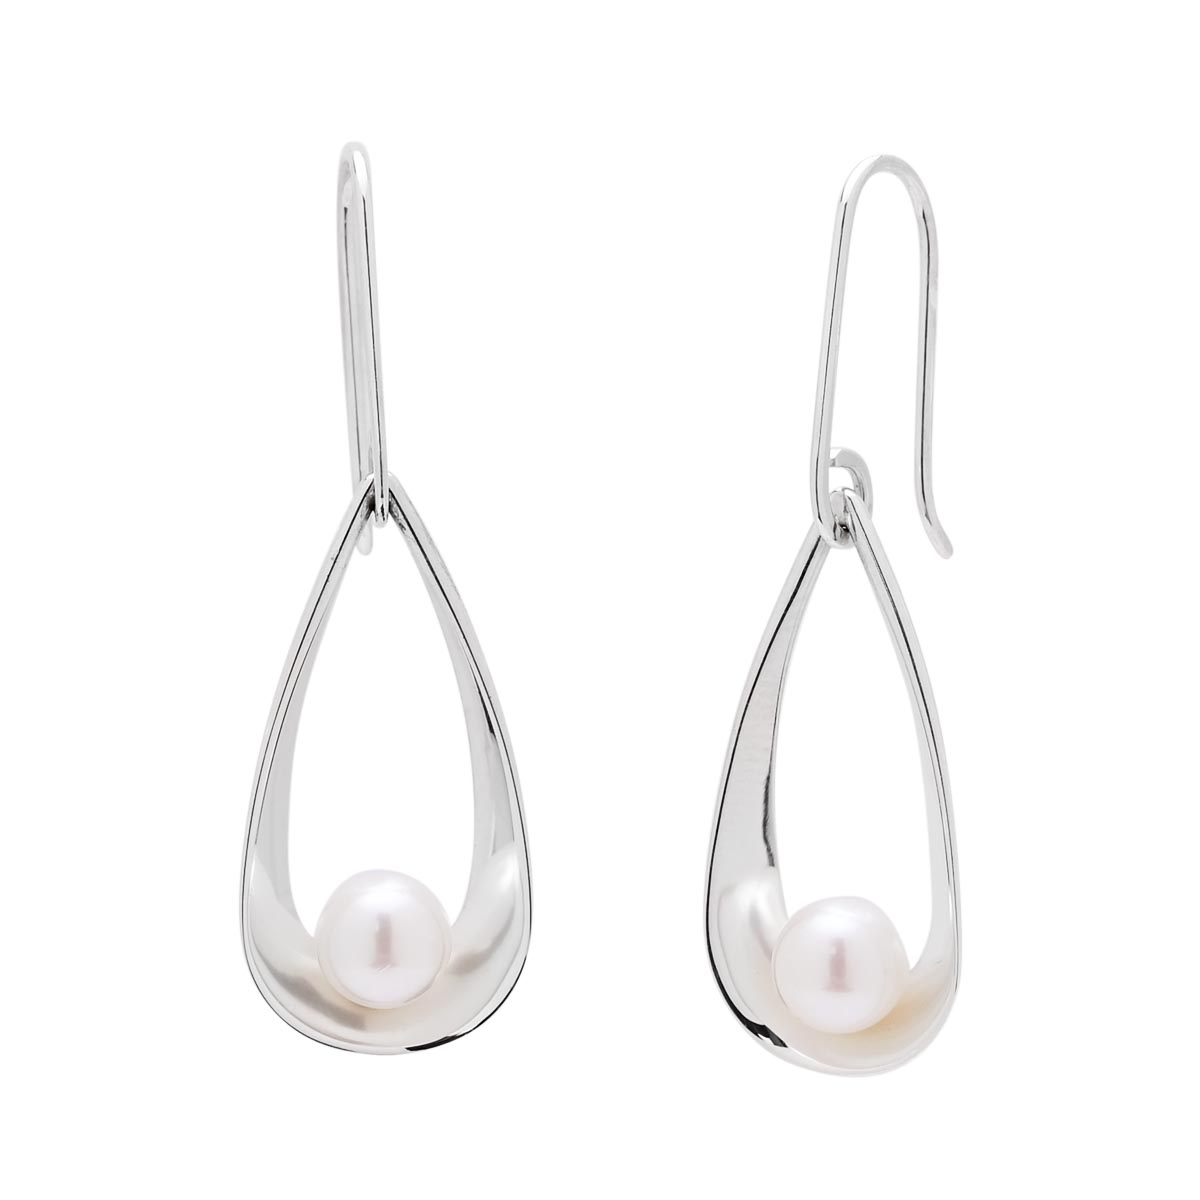 E.L. Designs Cultured Freshwater Pearl Rendezvous Earrings in Sterling Silver (6mm pearls)